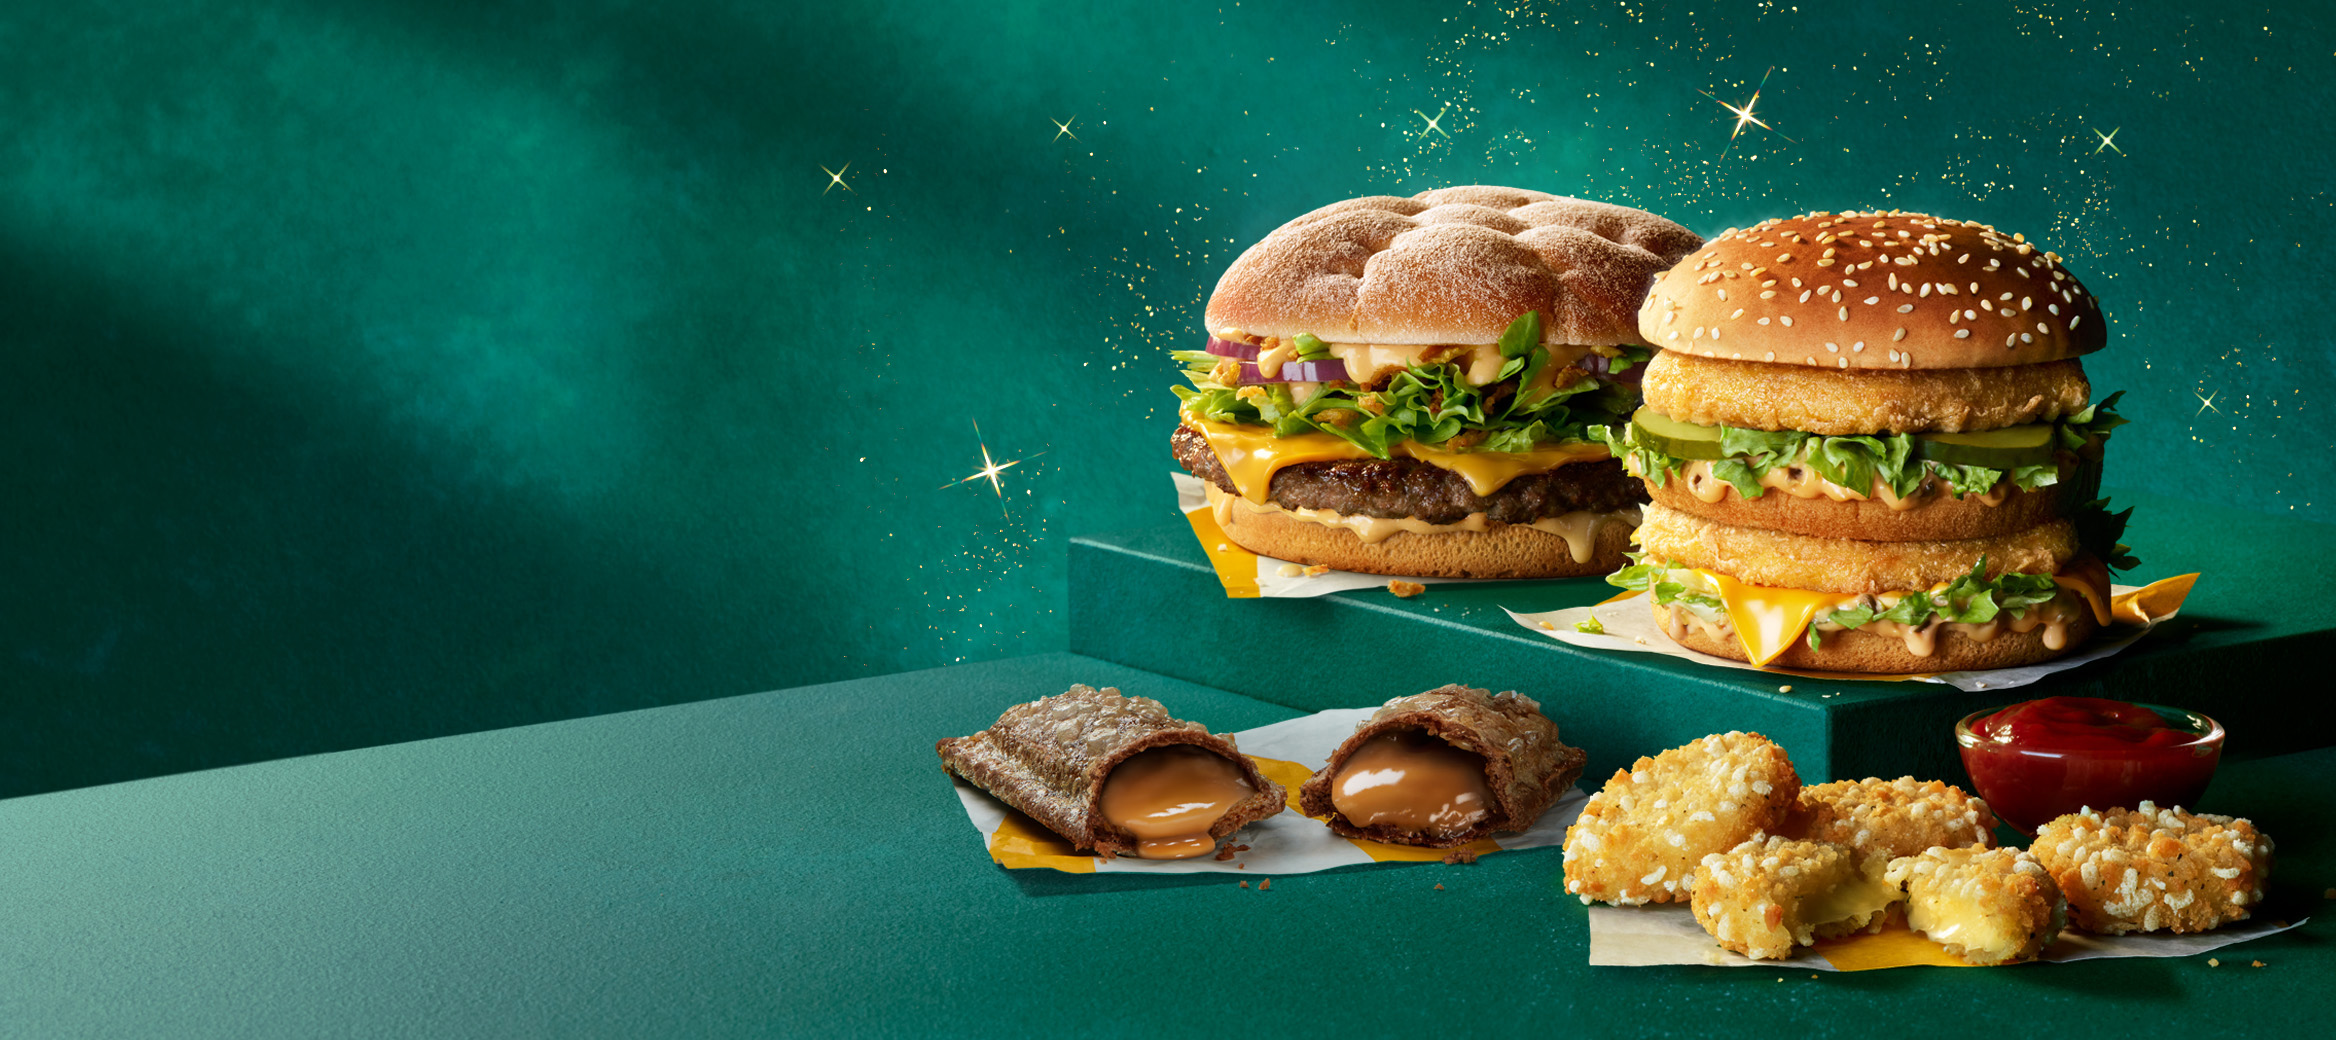 Two McDonald’s burgers, one caramel pie, cheese dippers and a sauce on a green plinth with a green starry background.